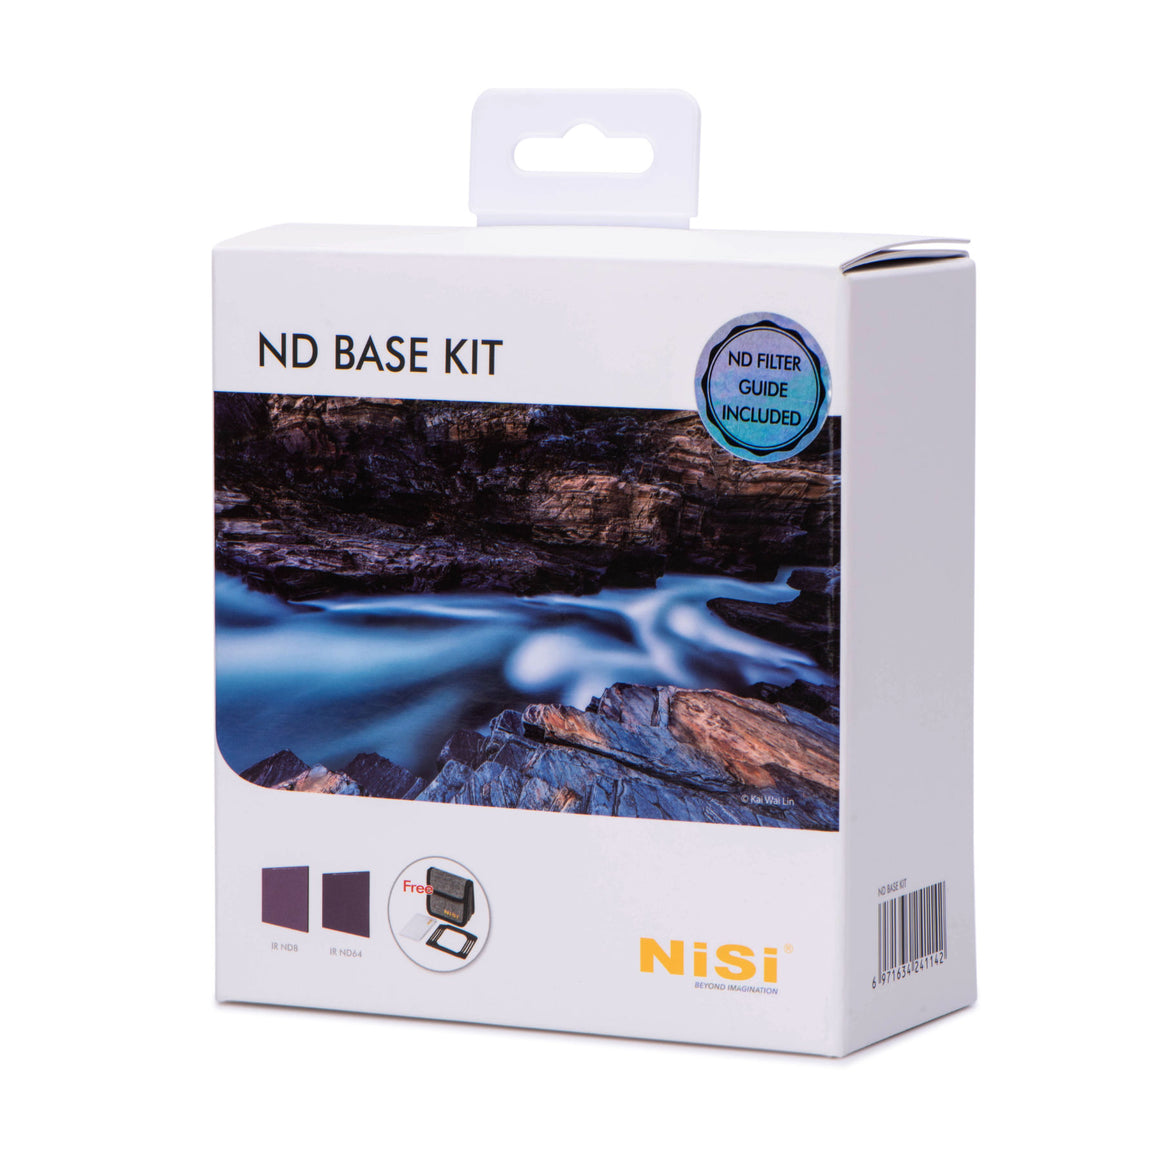 nisi-filters-100mm-nd-base-kit